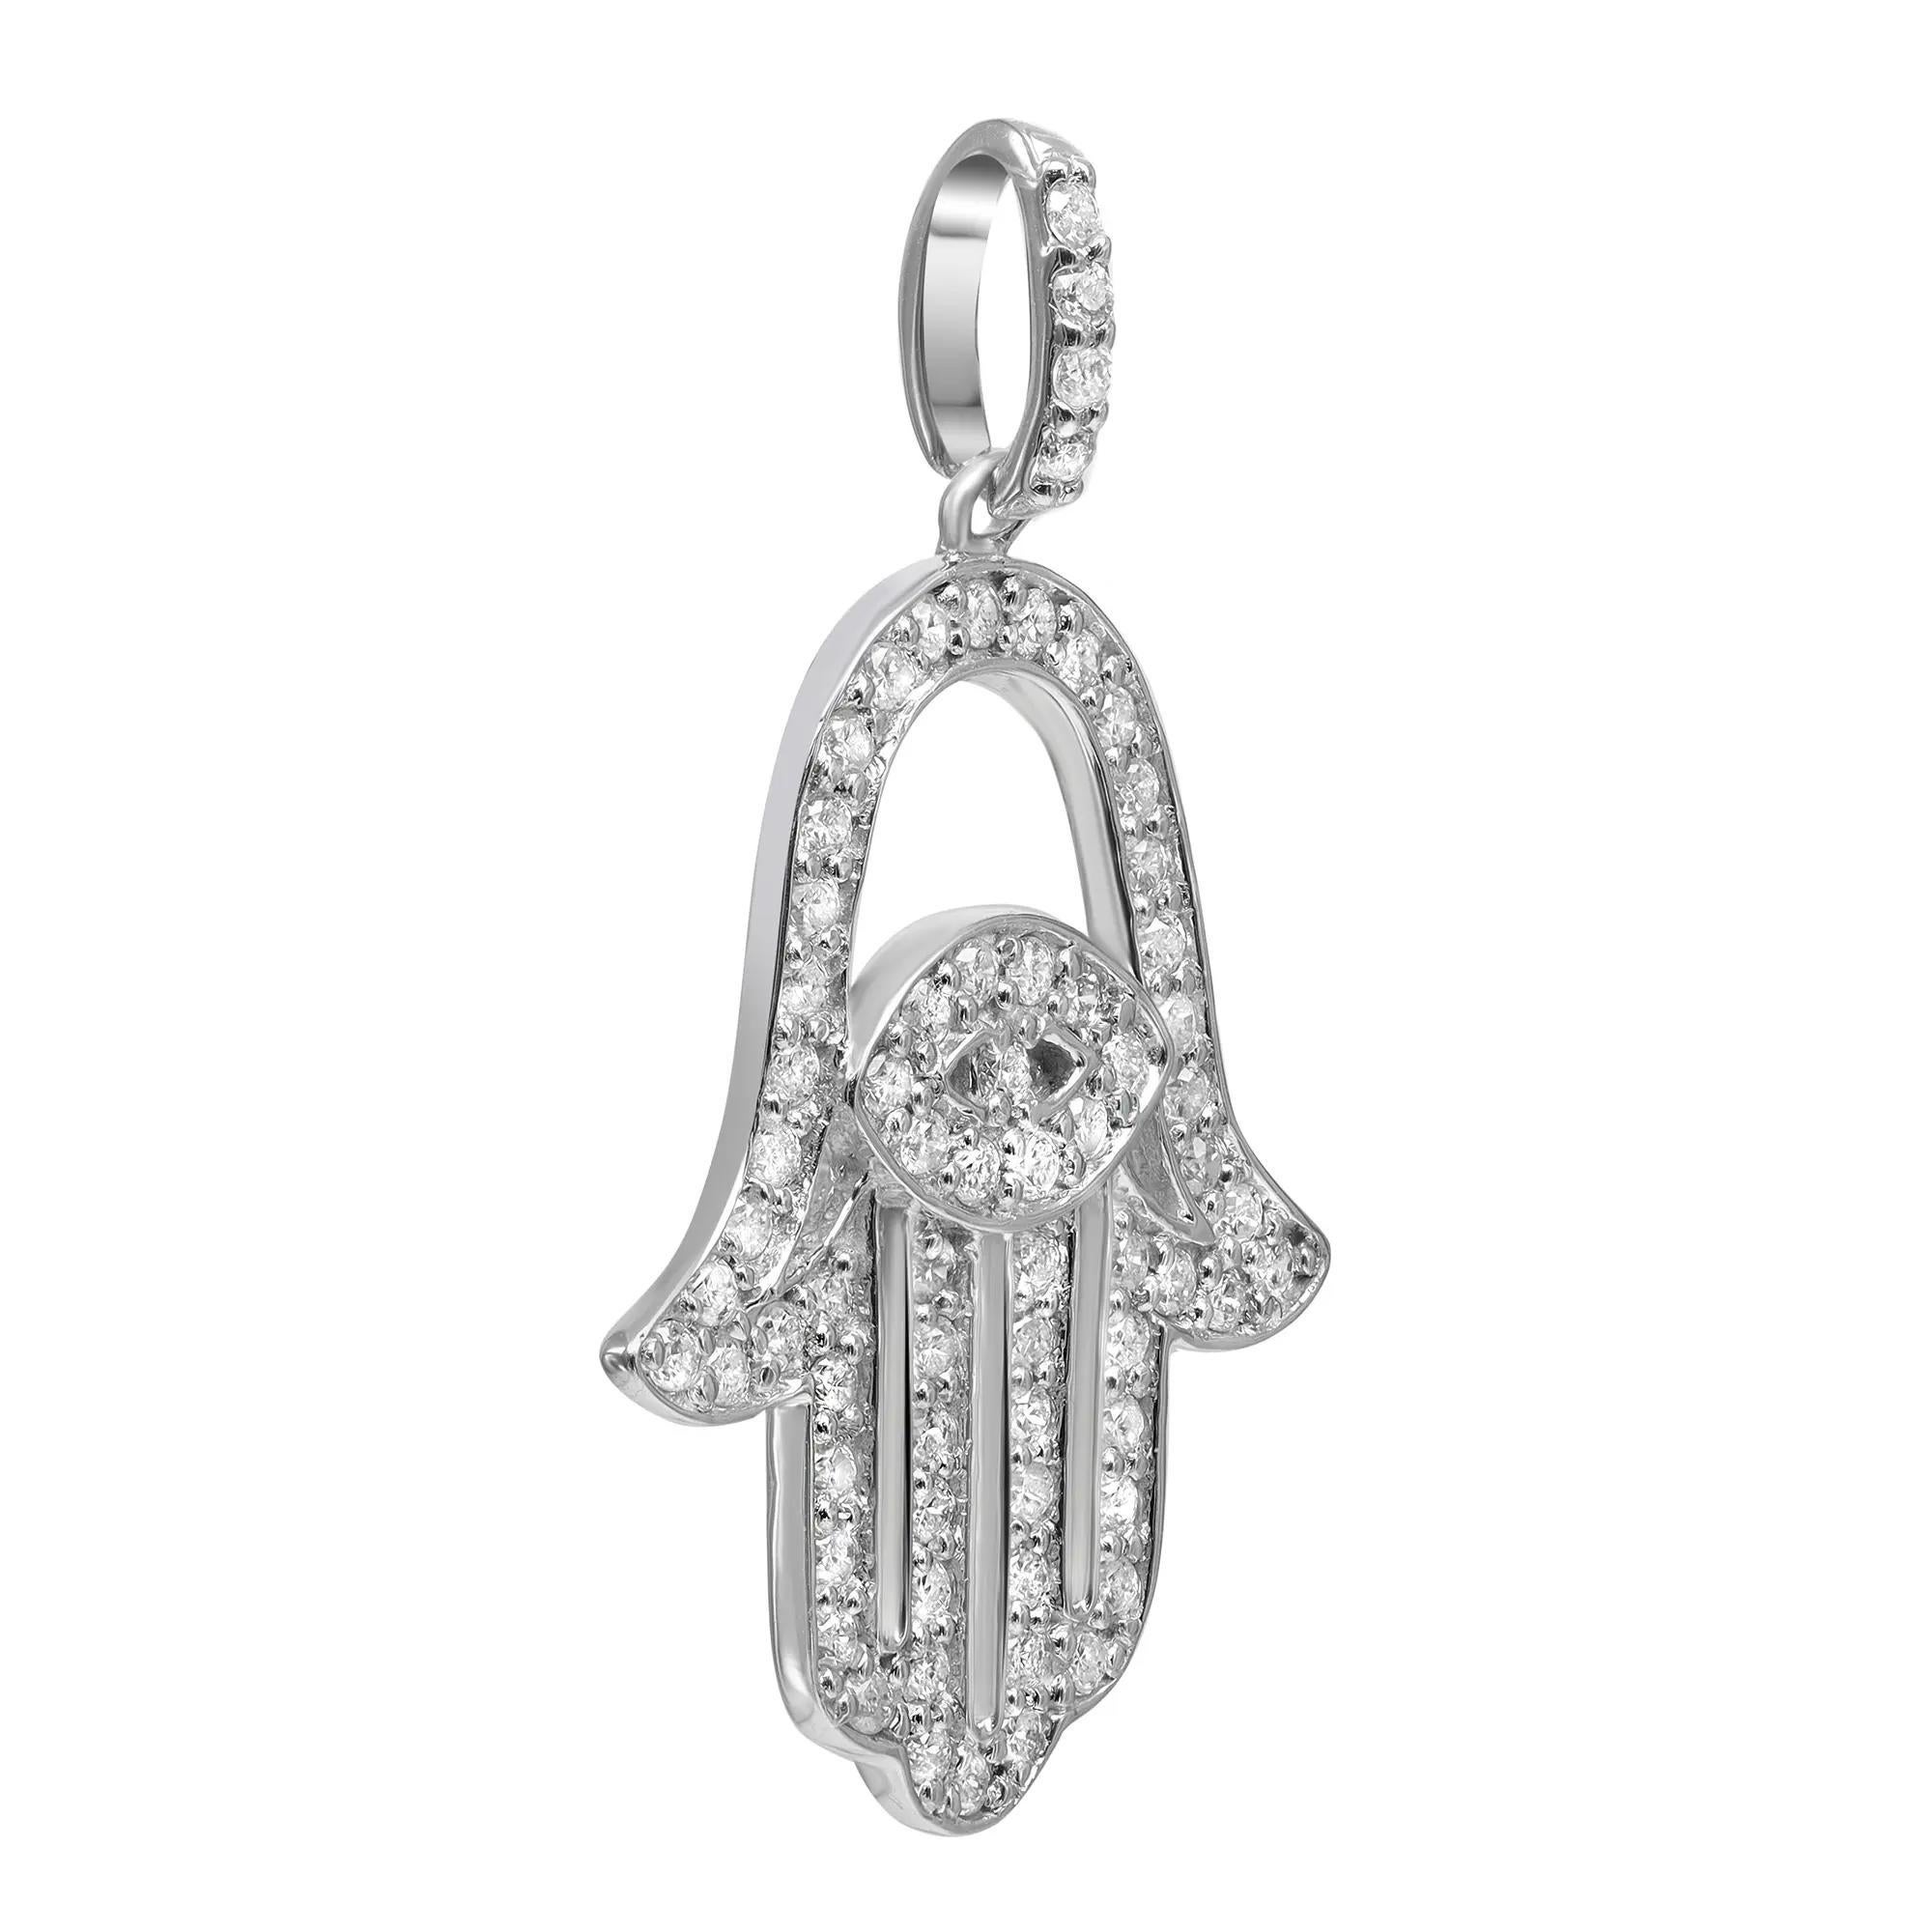 Diamond Hamsa Pendant Round Cut 14K White Gold 0.62Cttw In New Condition For Sale In New York, NY